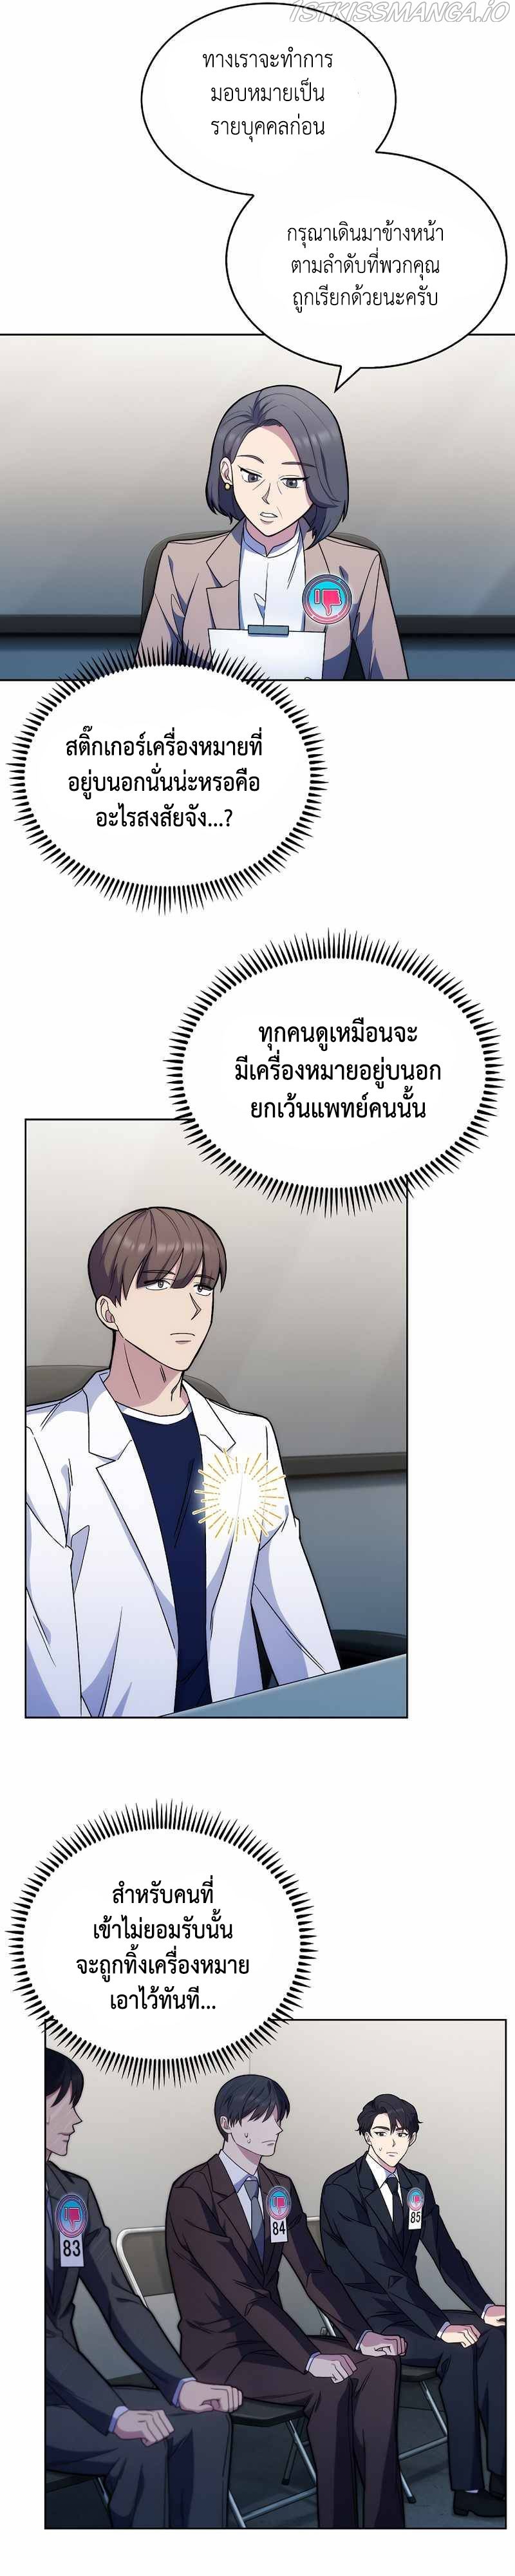 Level Up Doctor 10 (13)